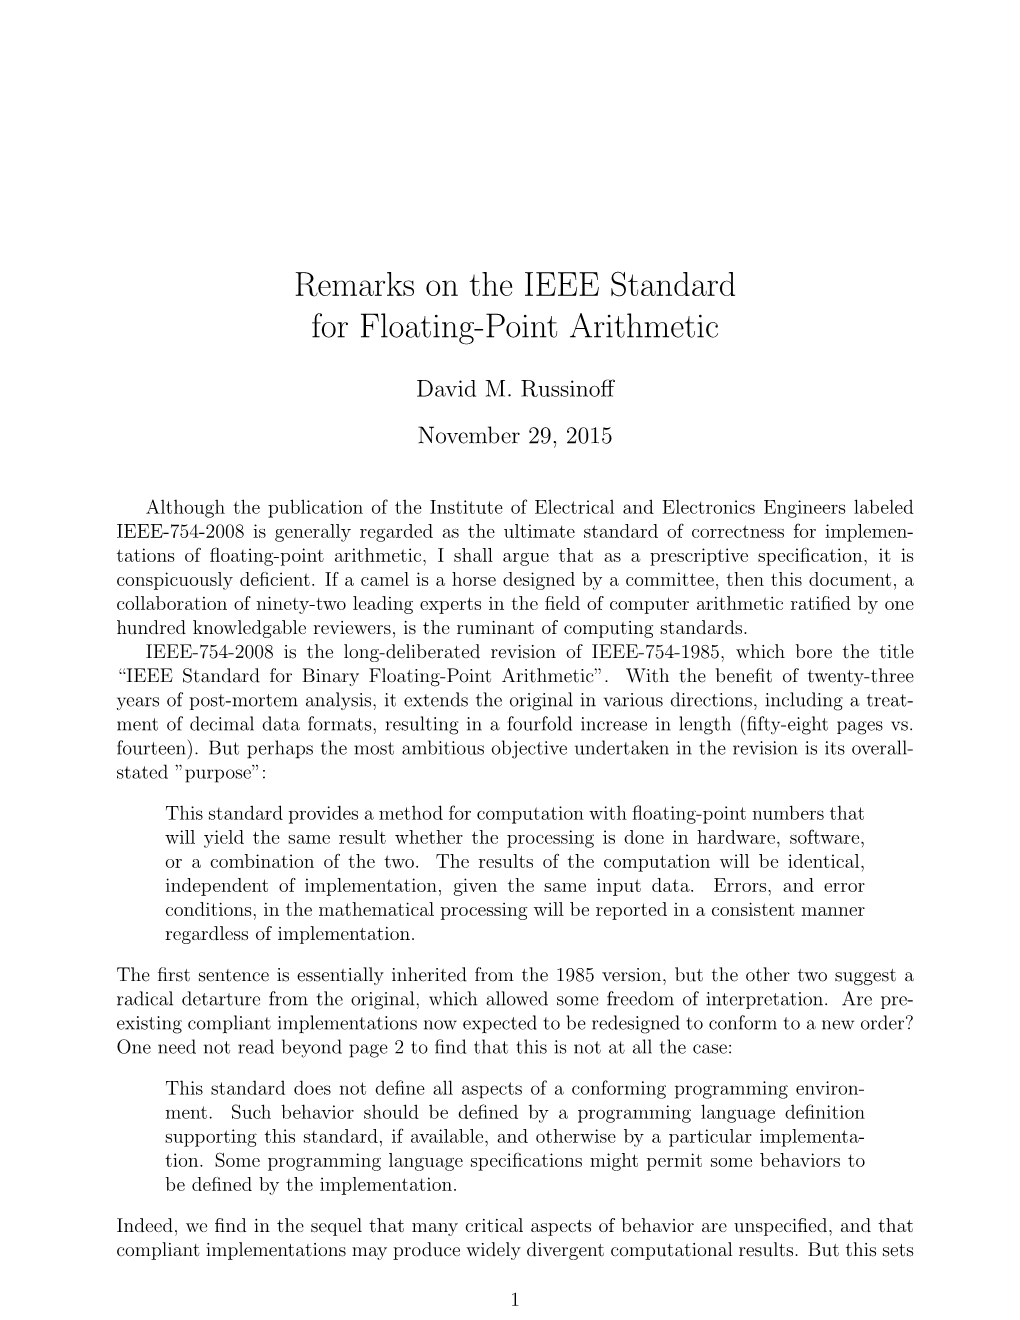 Remarks on the IEEE Standard for Floating-Point Arithmetic